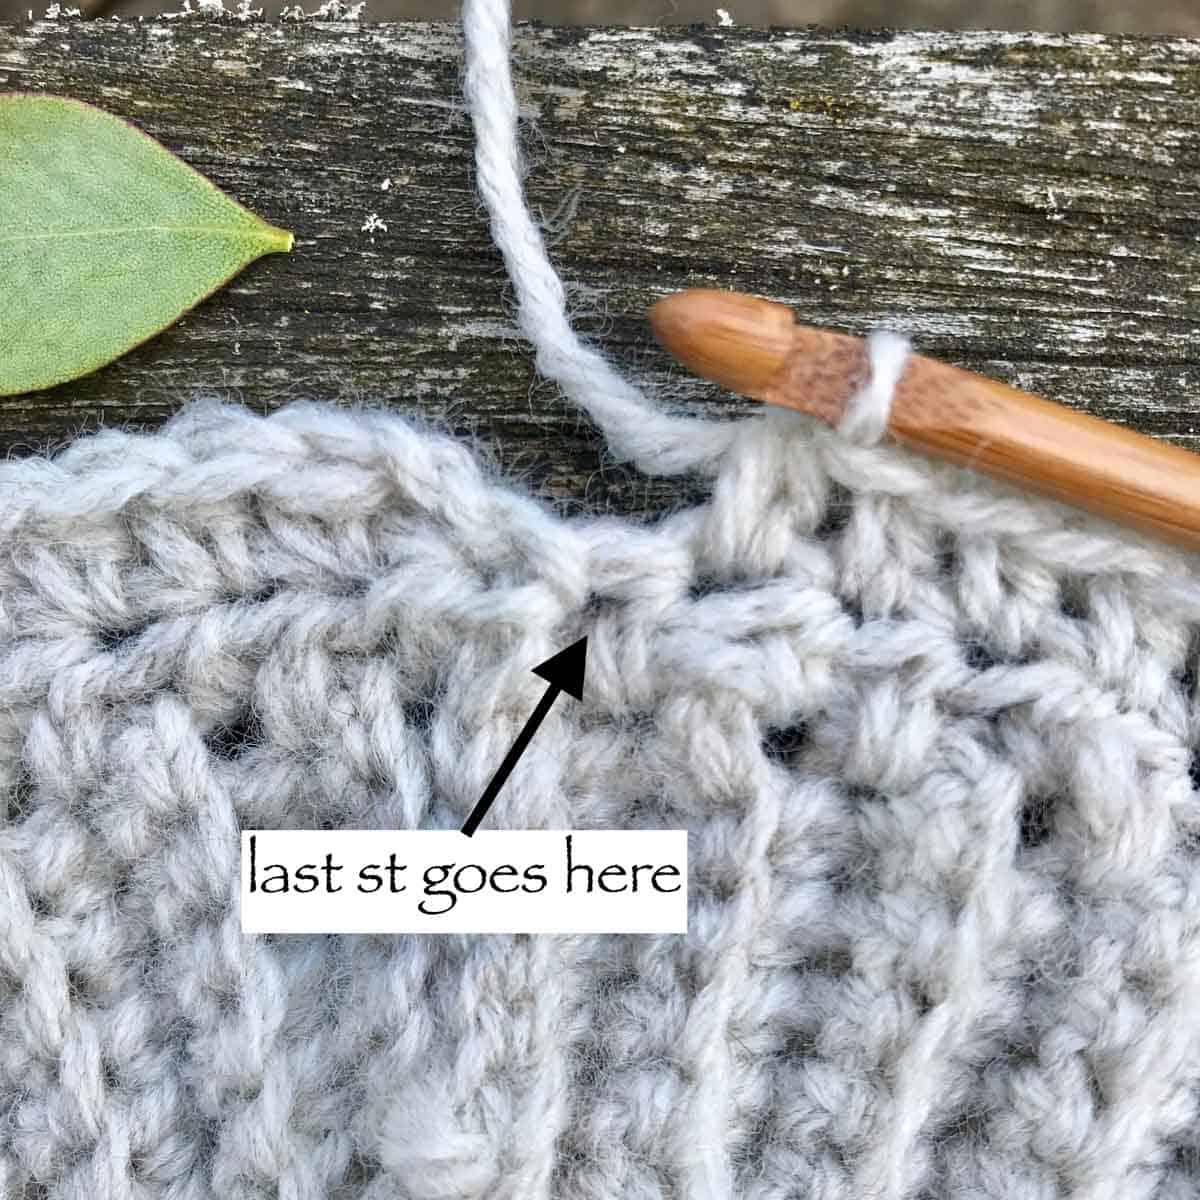 Crochet tutorial photo shows where to put your crochet hook when stitching. Free pattern for a pullover baby sweater.